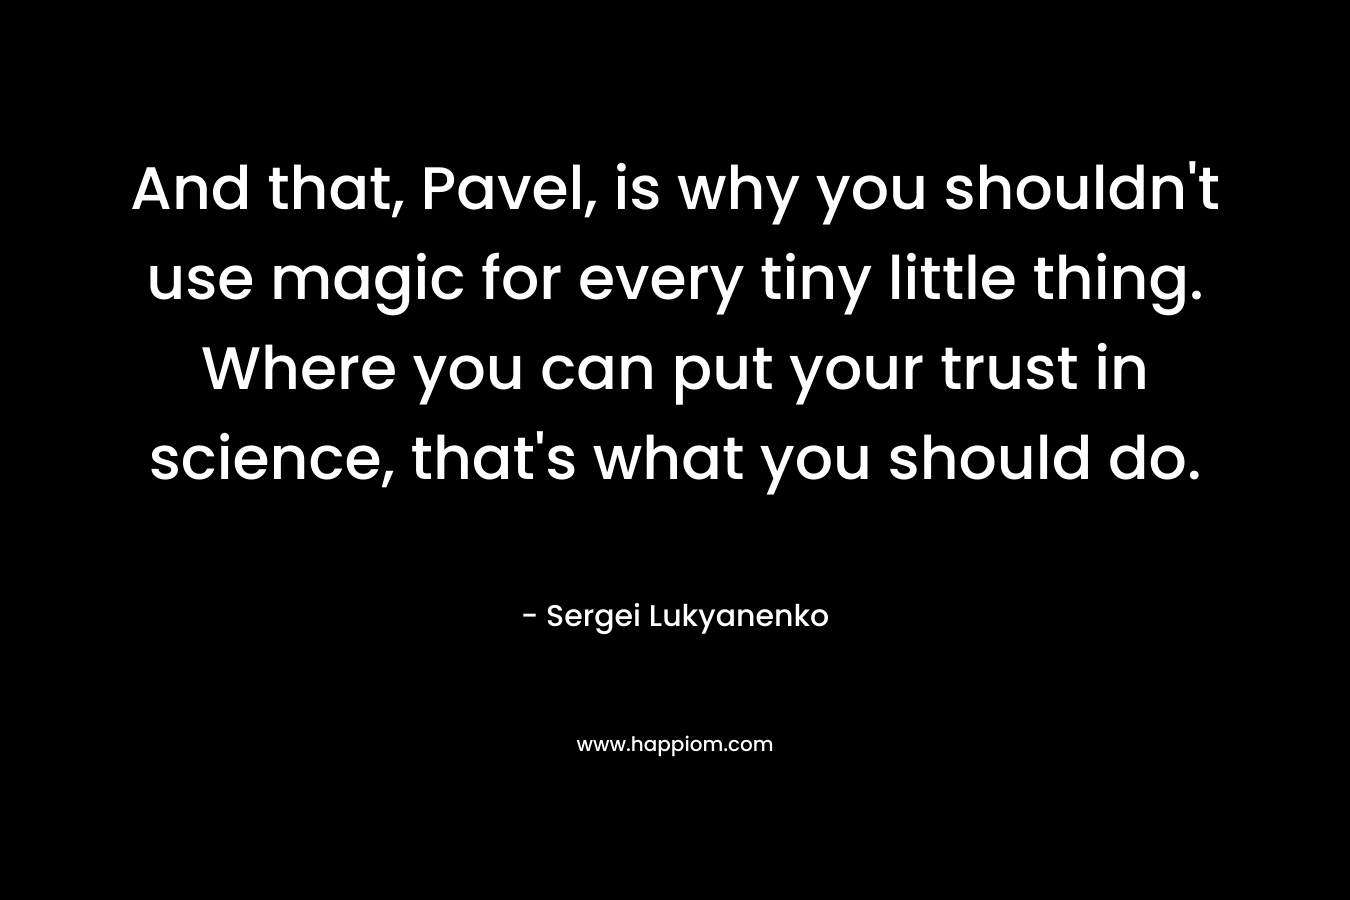 And that, Pavel, is why you shouldn’t use magic for every tiny little thing. Where you can put your trust in science, that’s what you should do. – Sergei Lukyanenko